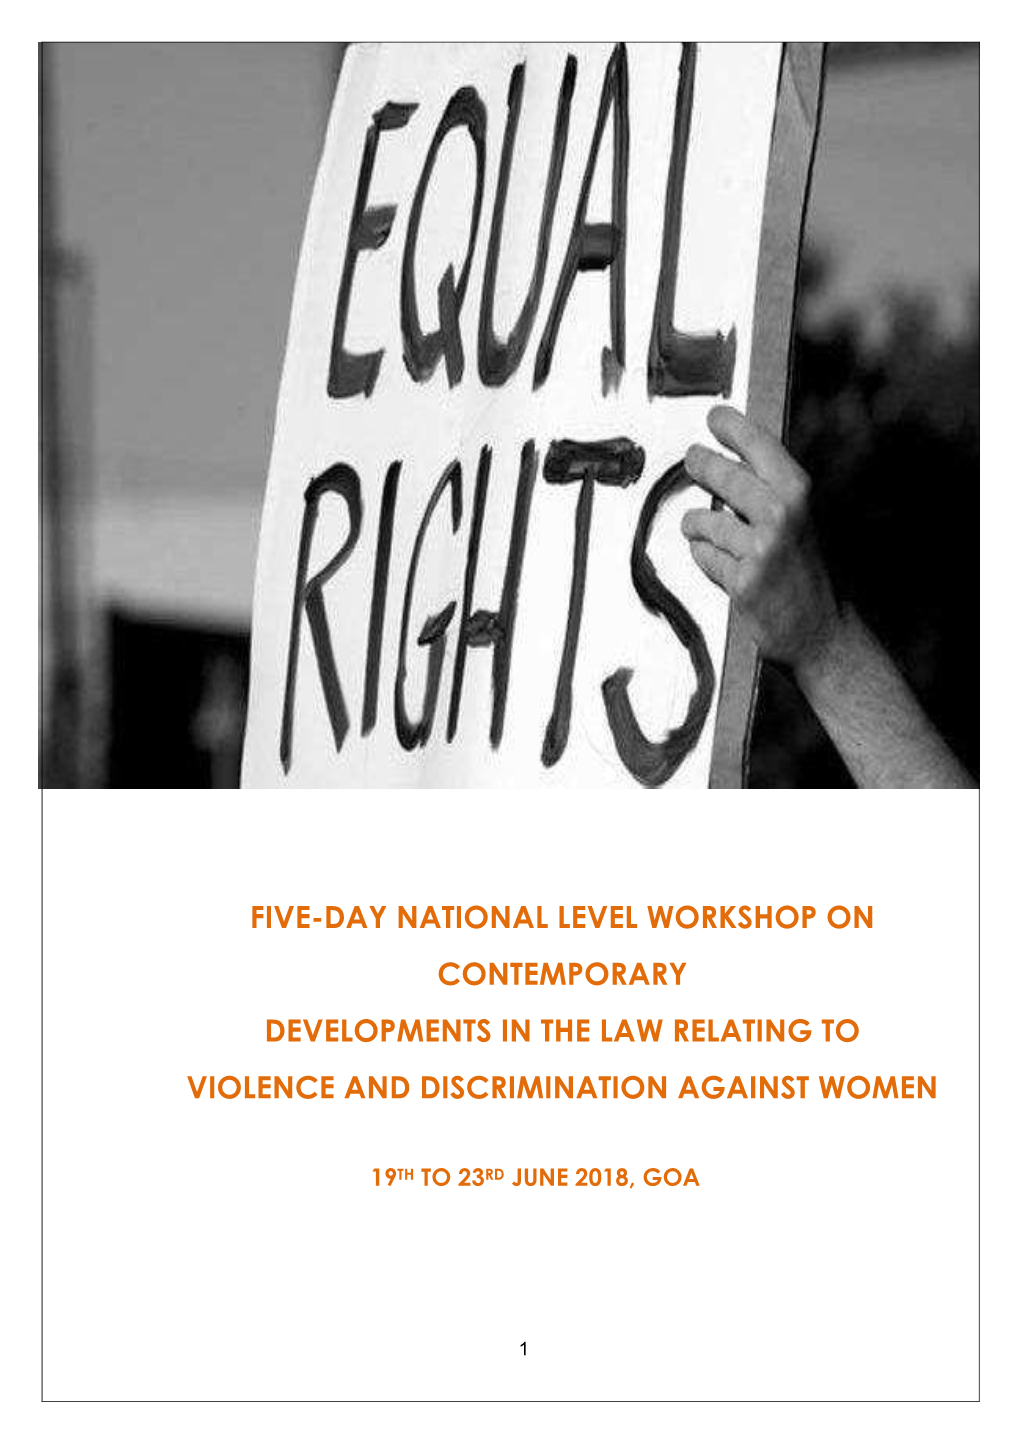 Five-Day National Level Workshop on Contemporary Developments in the Law Relating to Violence and Discrimination Against Women